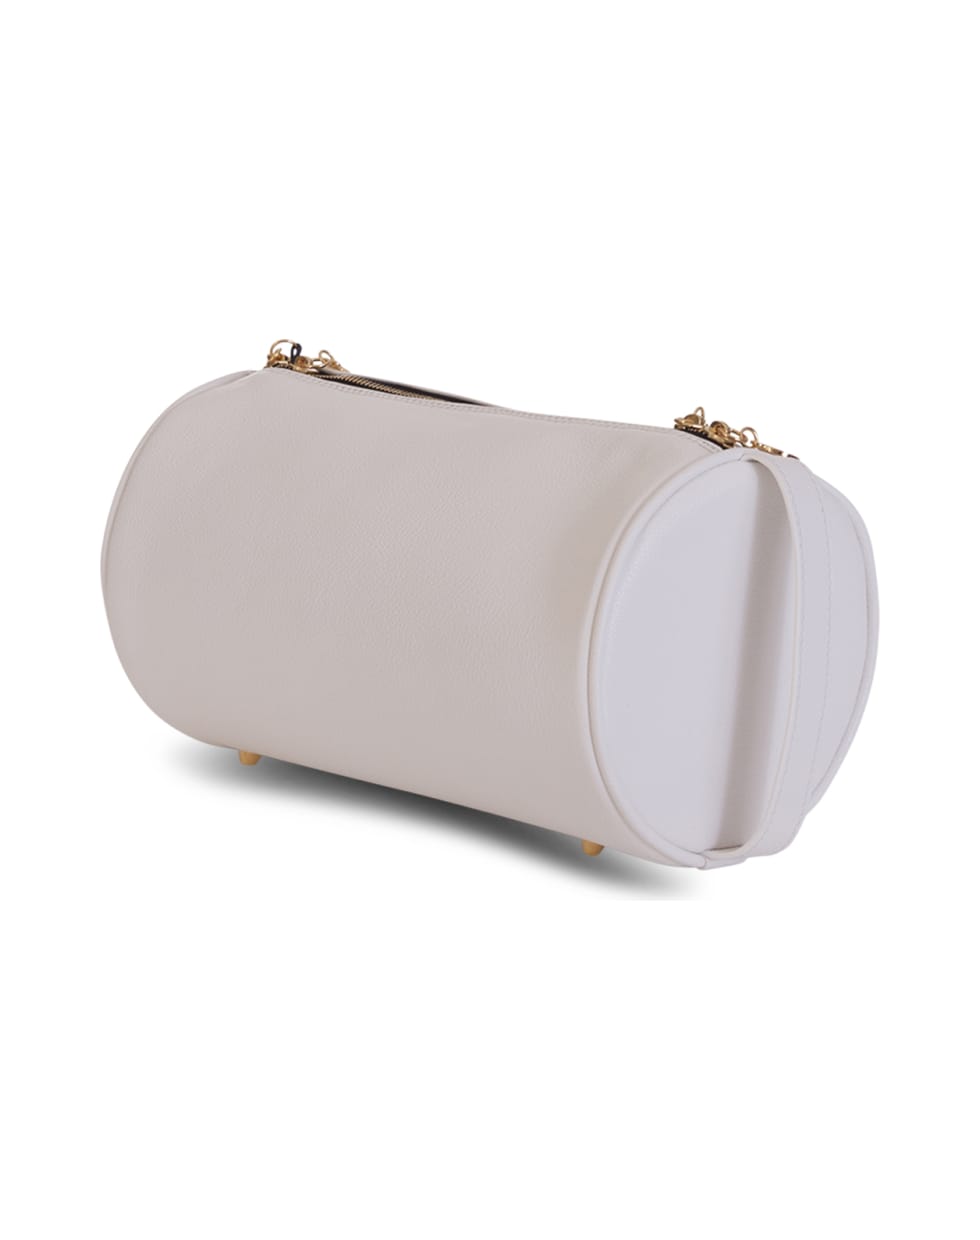 Patou Barrel Bag In Faux Leather | italist, ALWAYS LIKE A SALE